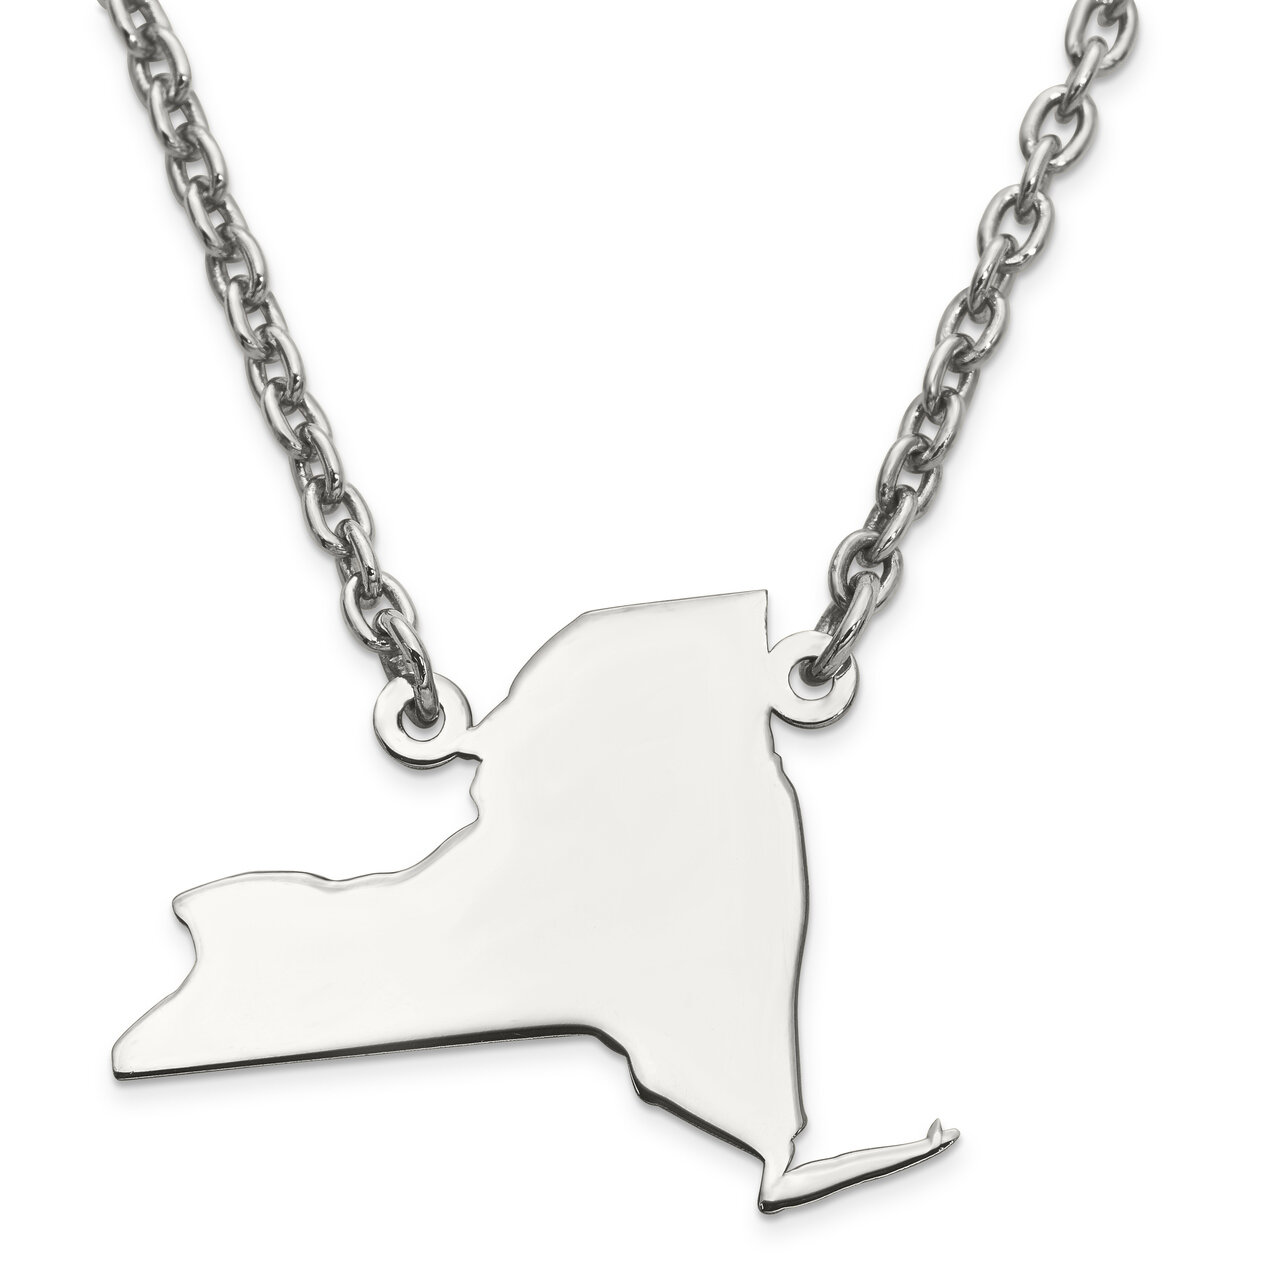 New York State Pendant Necklace with Chain Sterling Silver Engravable XNA706SS-NY